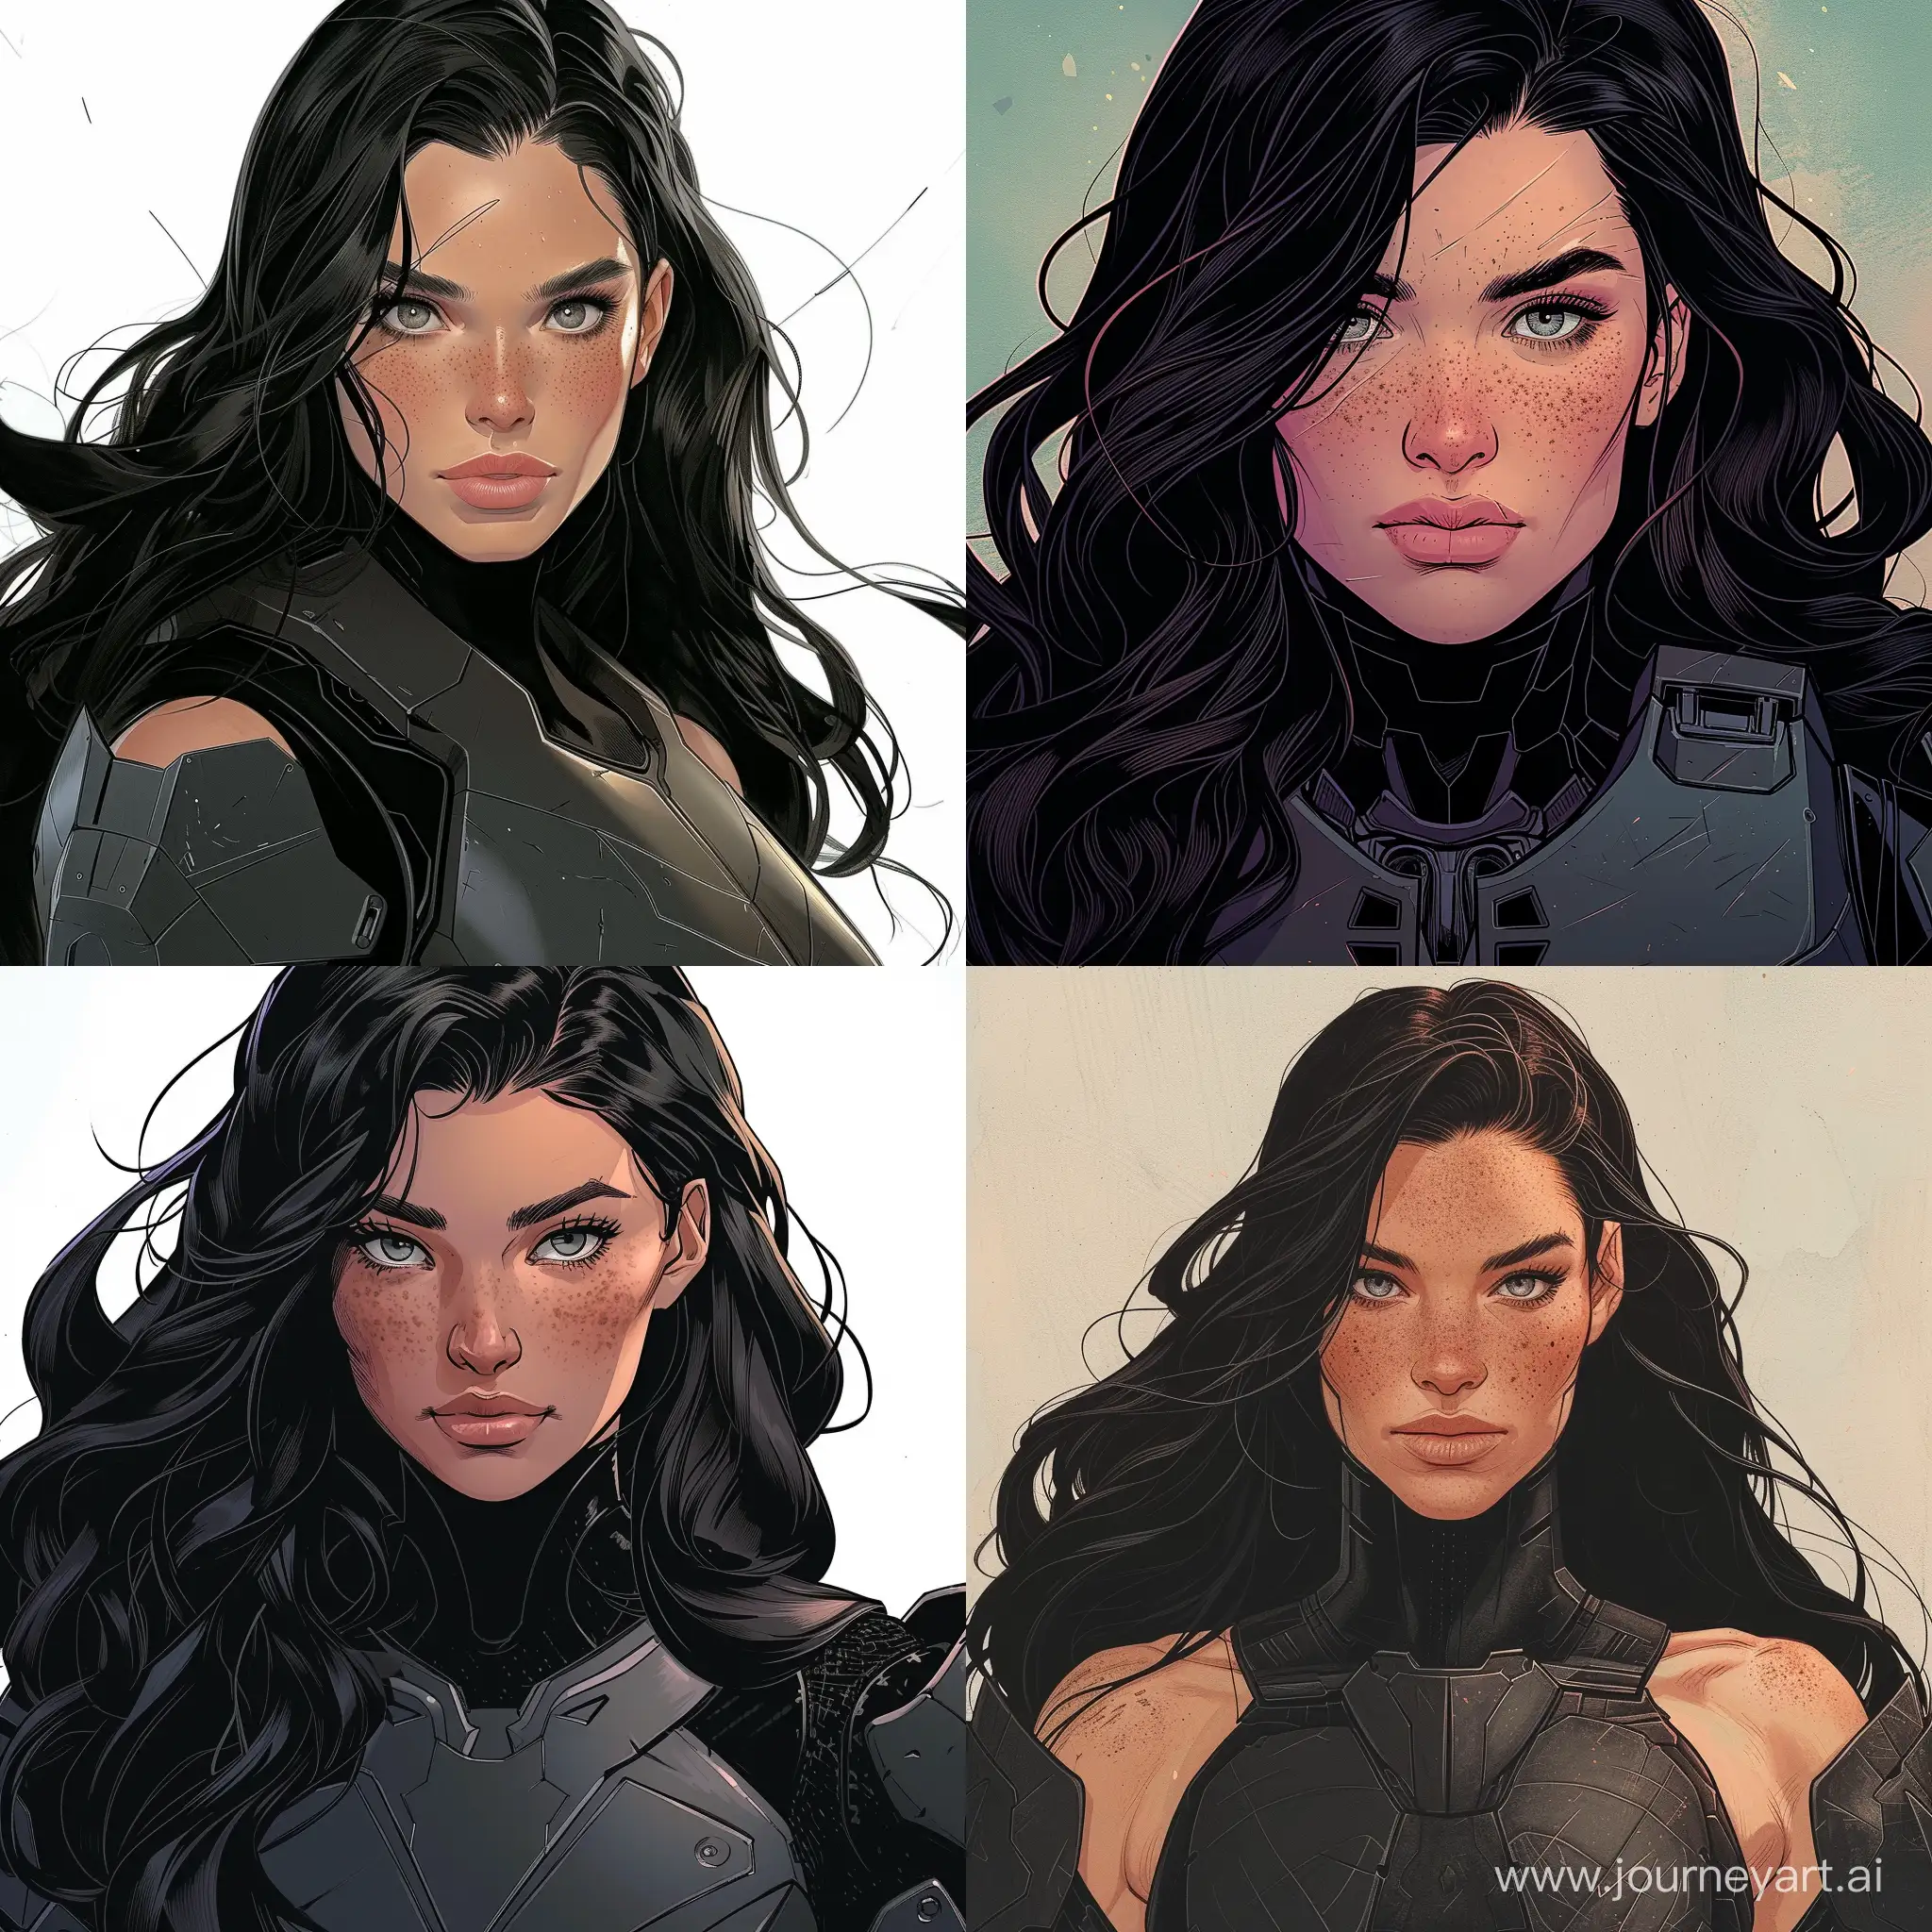 in the world of halo, a woman in her thirties, brunette with a light tan, freckles on her cheeks, long wavy black hair, a lock of hair in front of her right eye, gray eyes clear, she has an intense look, she looks forward, she has the body of a top model, she wears black armor, comics style